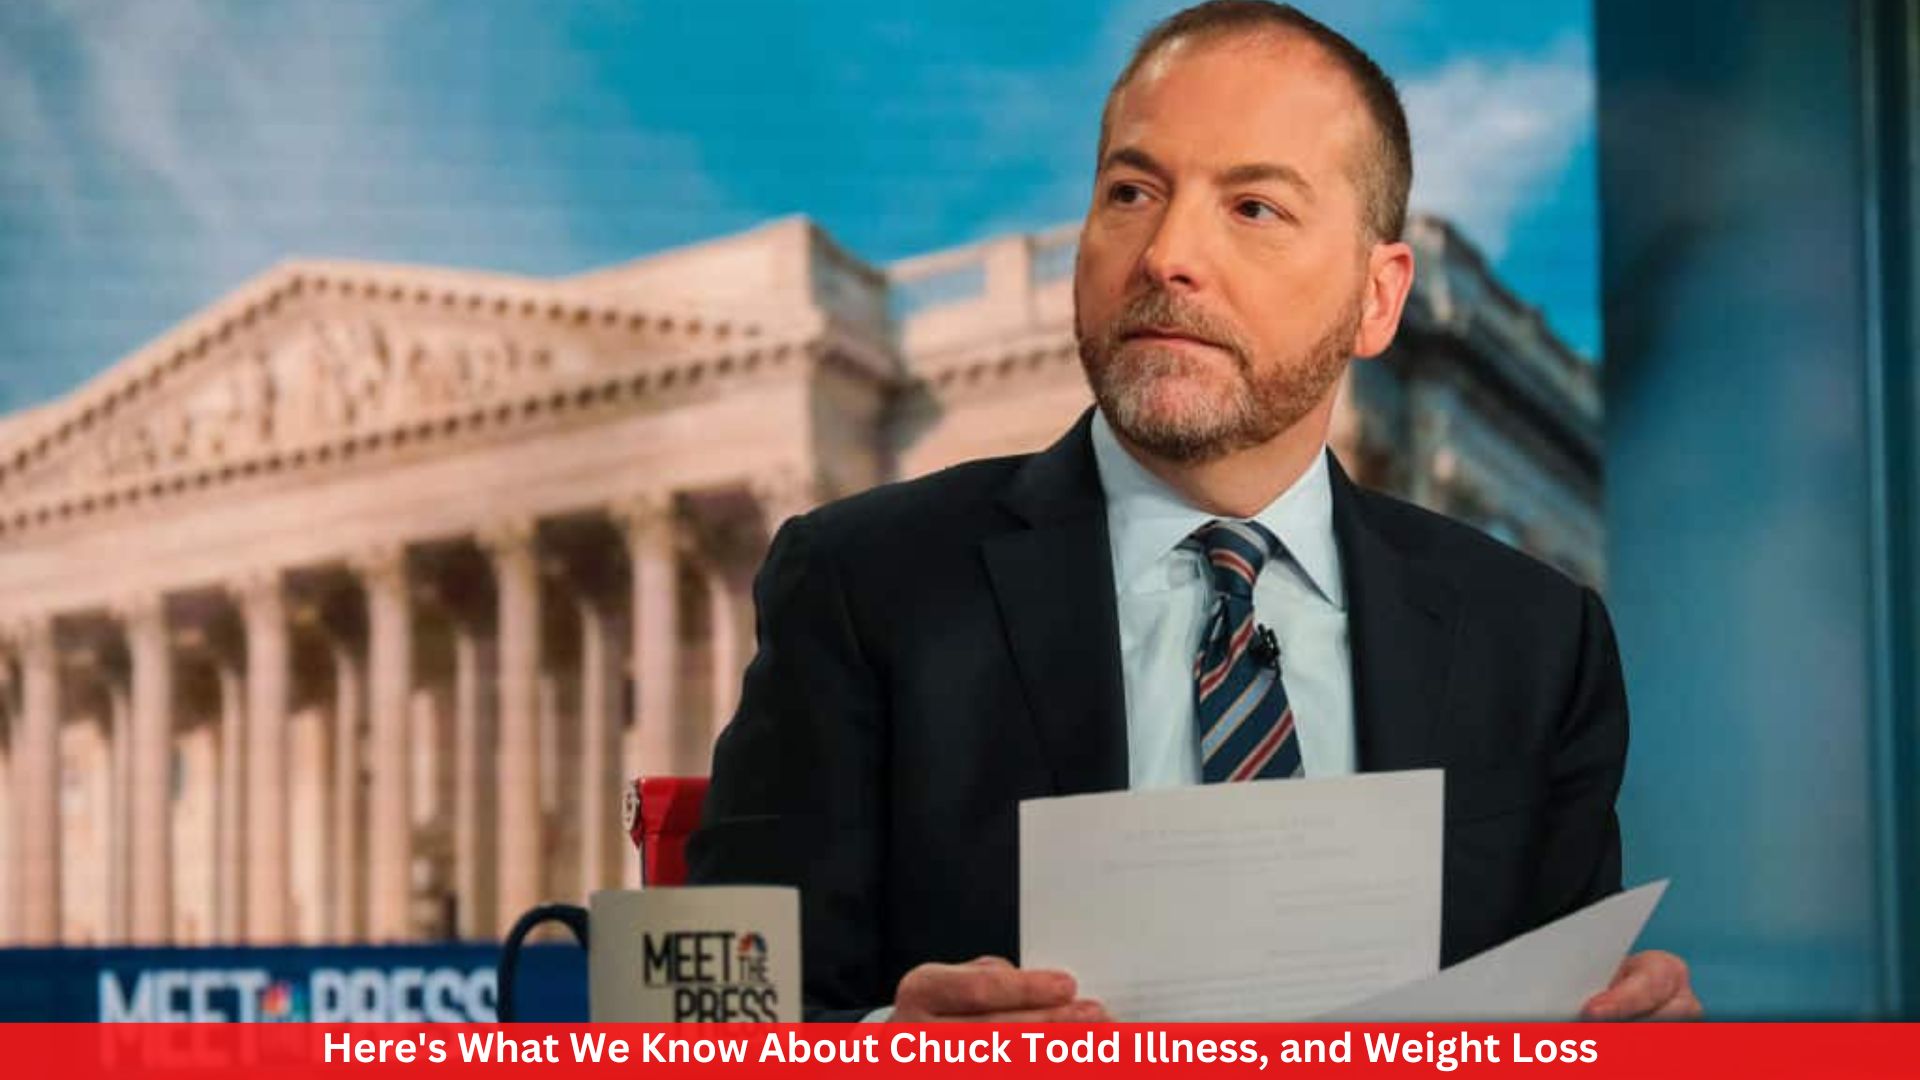 Here's What We Know About Chuck Todd Illness, and Weight Loss